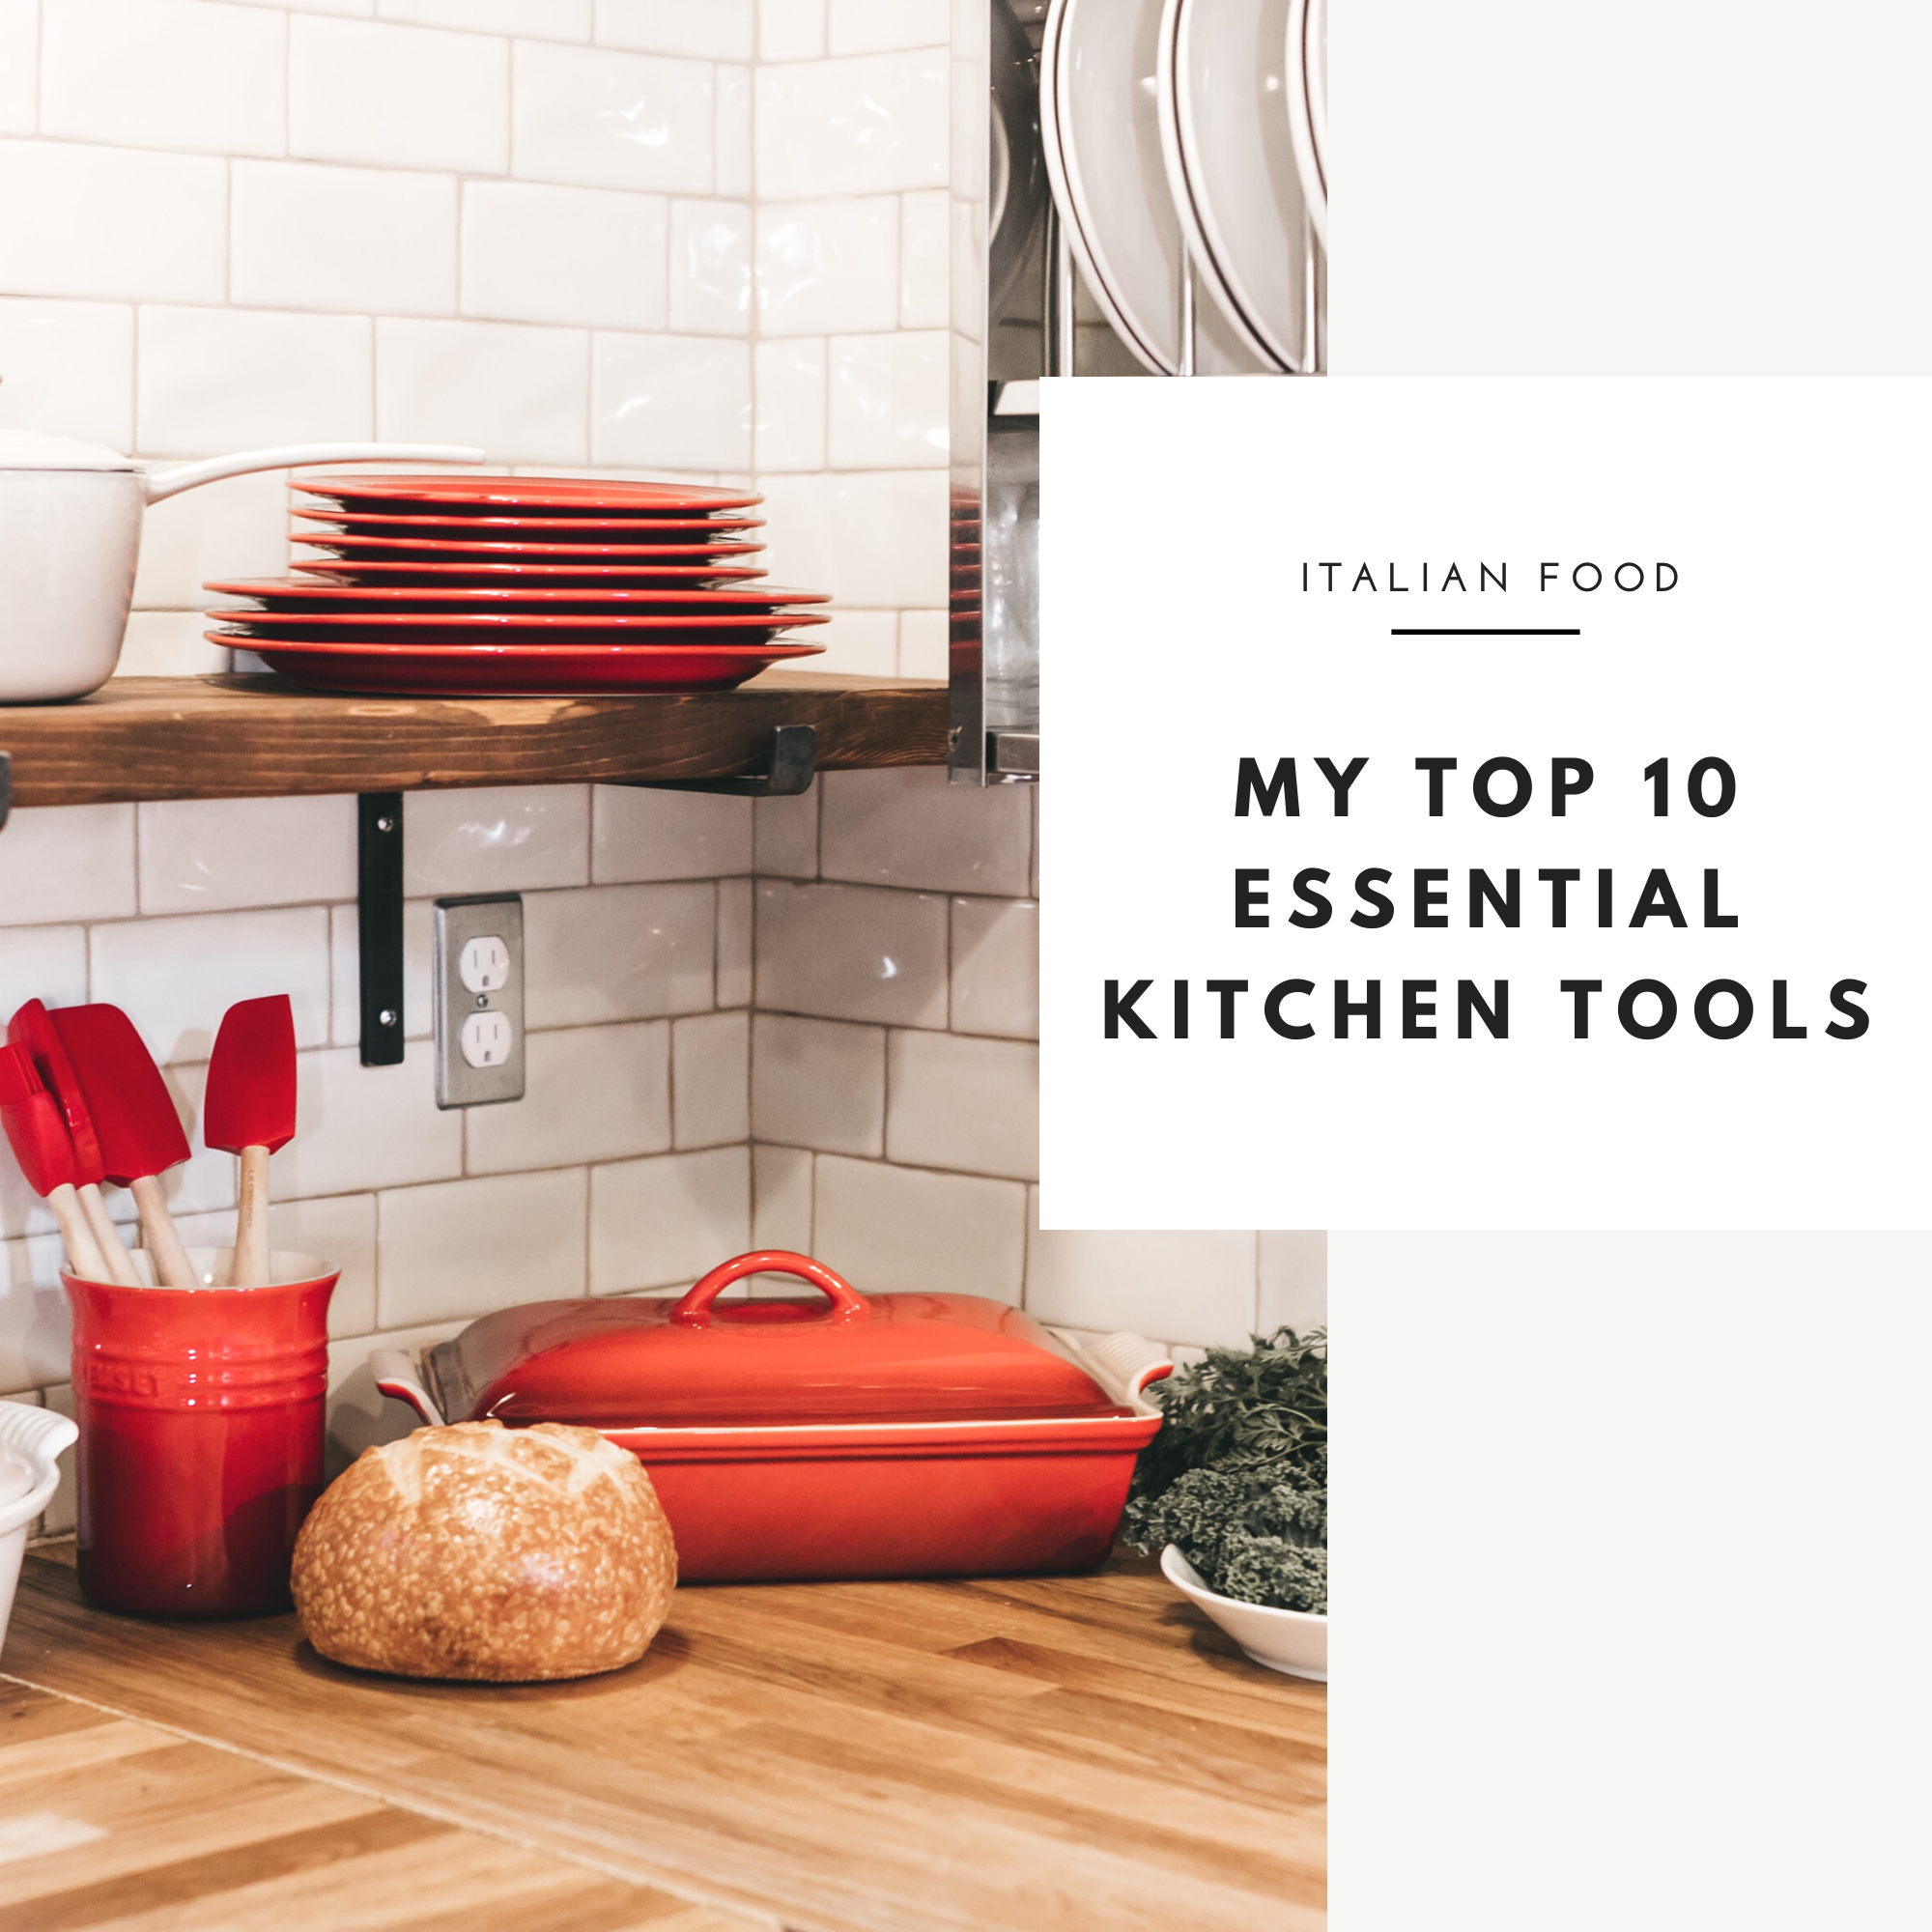 My top 10 essential kitchen tools. 1